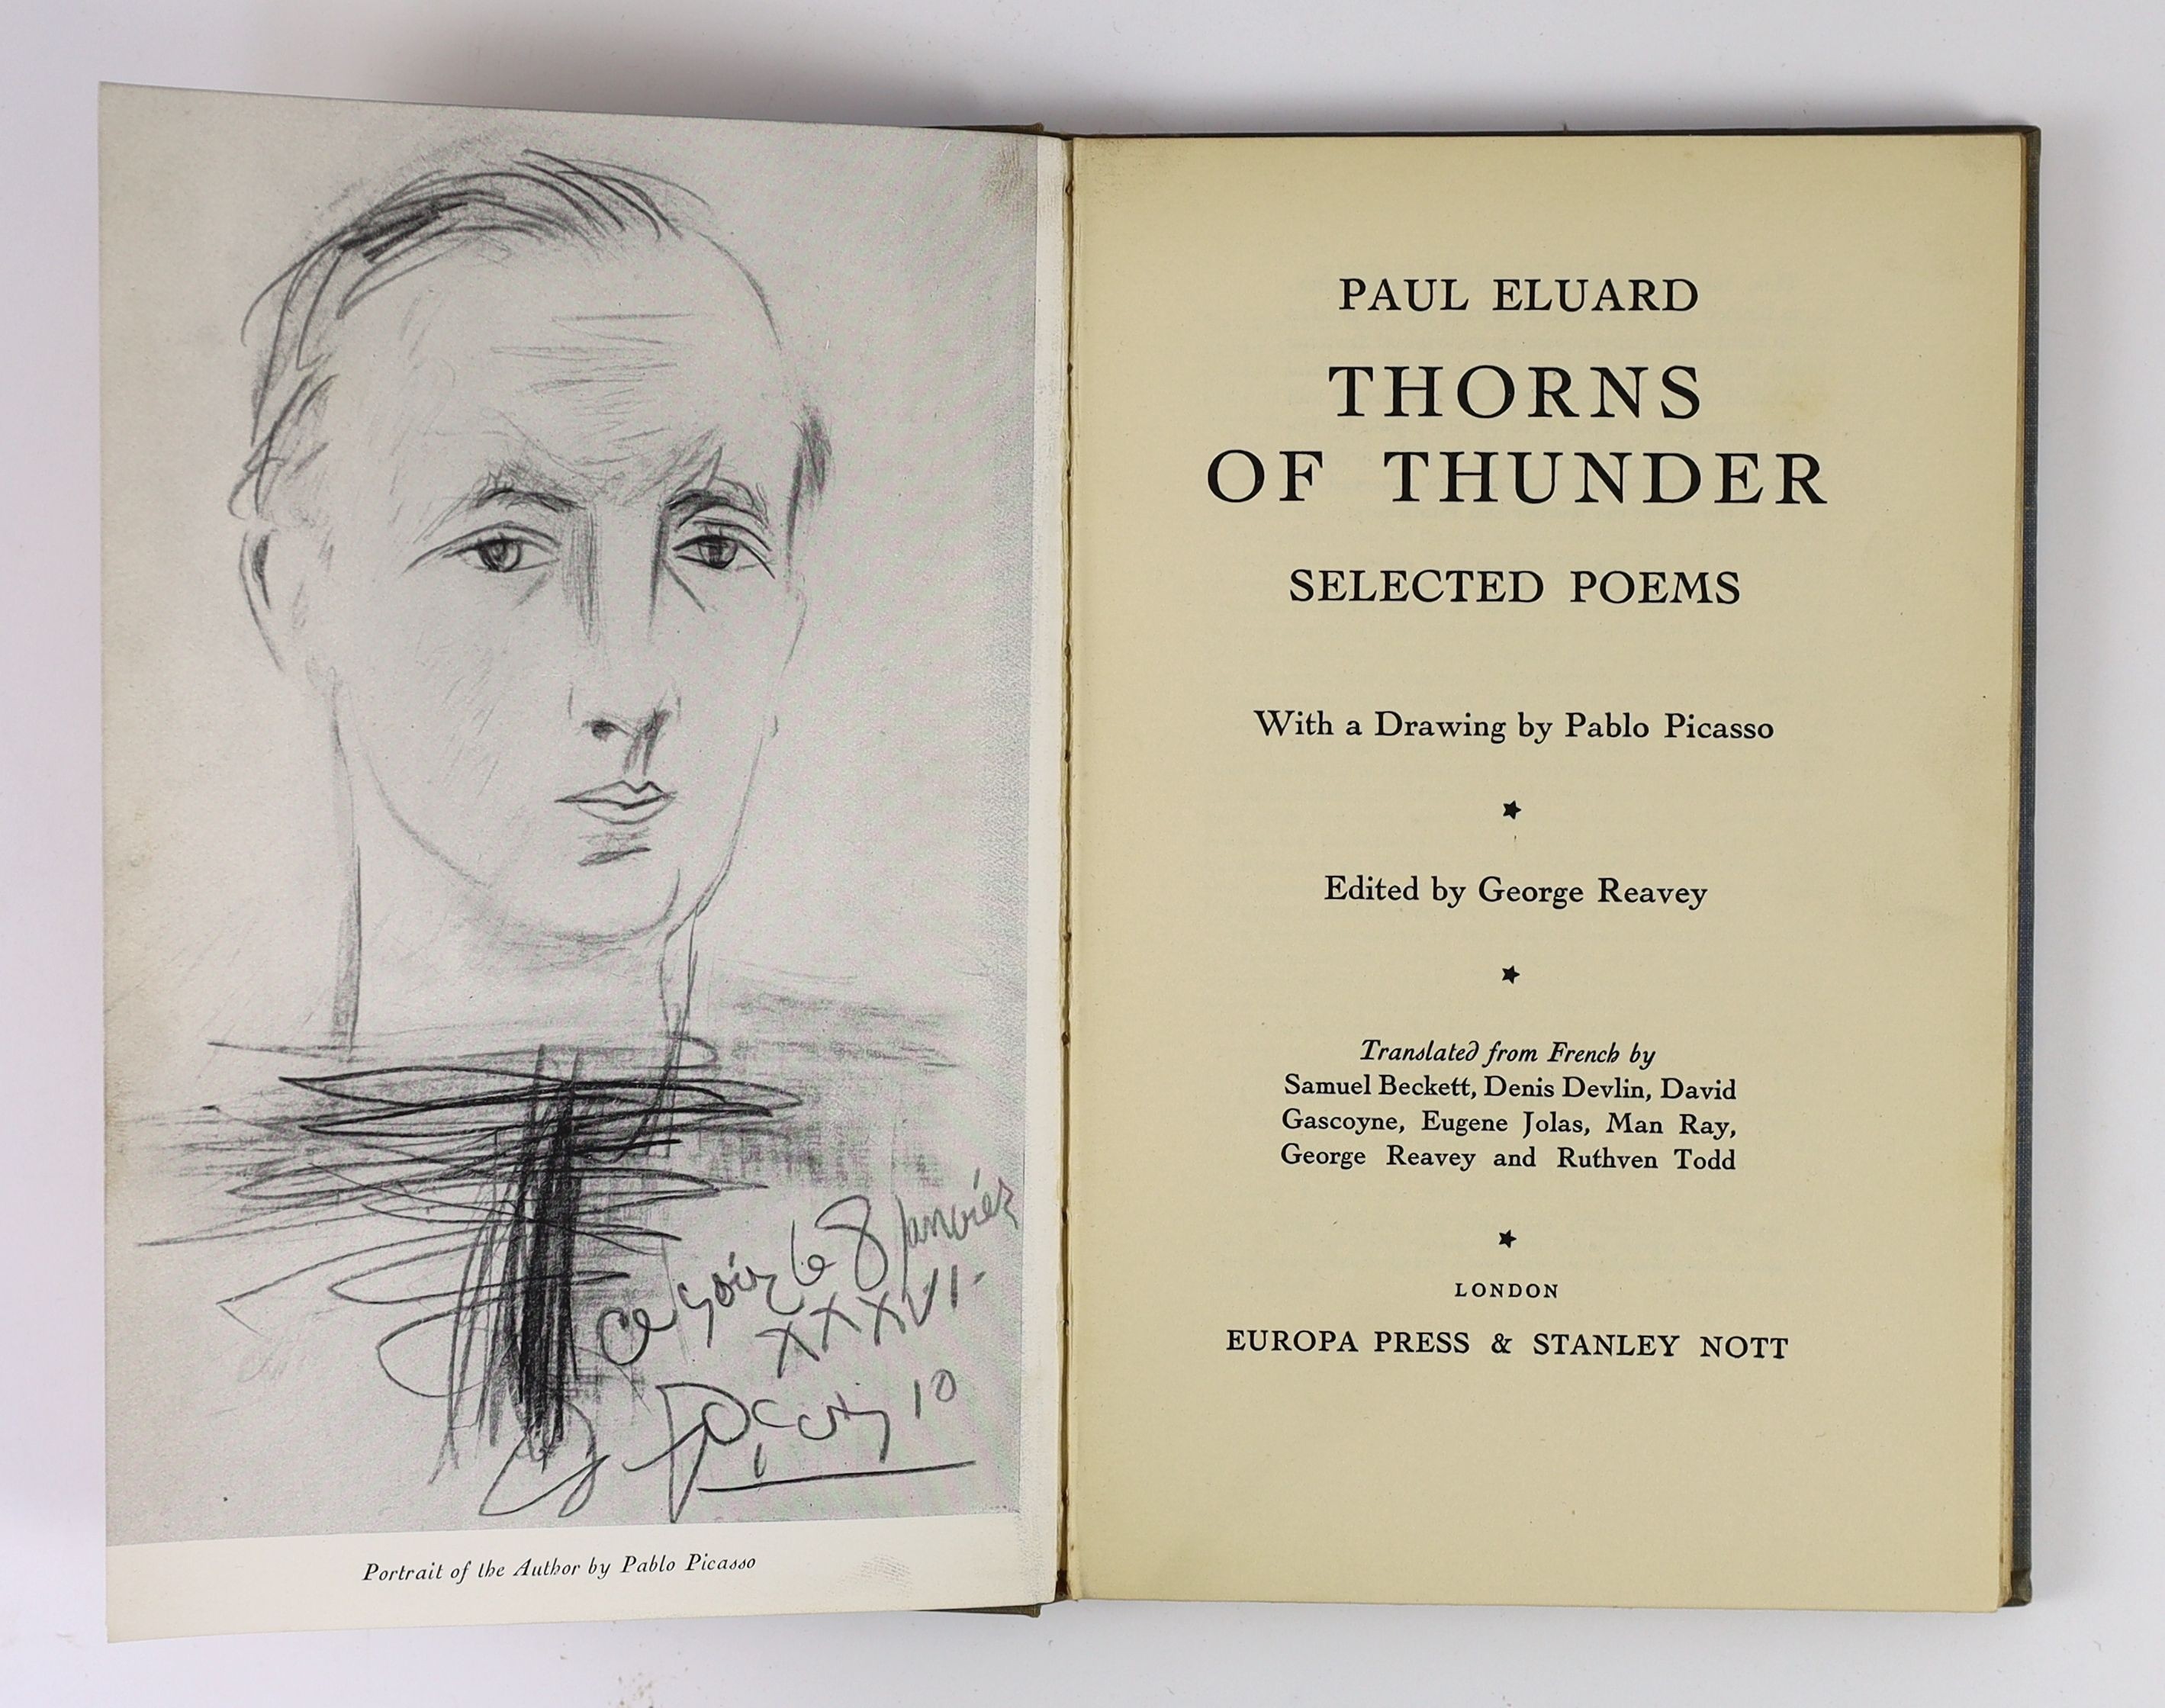 Eluard, Paul - Thorns of Thunder Selected Poems. 1st and limited ed. one of 600. With frontispiece of the author by Pablo Picasso. Cloth with letters direct on spine. With half title and limitation. 8vo. Europa Press & S